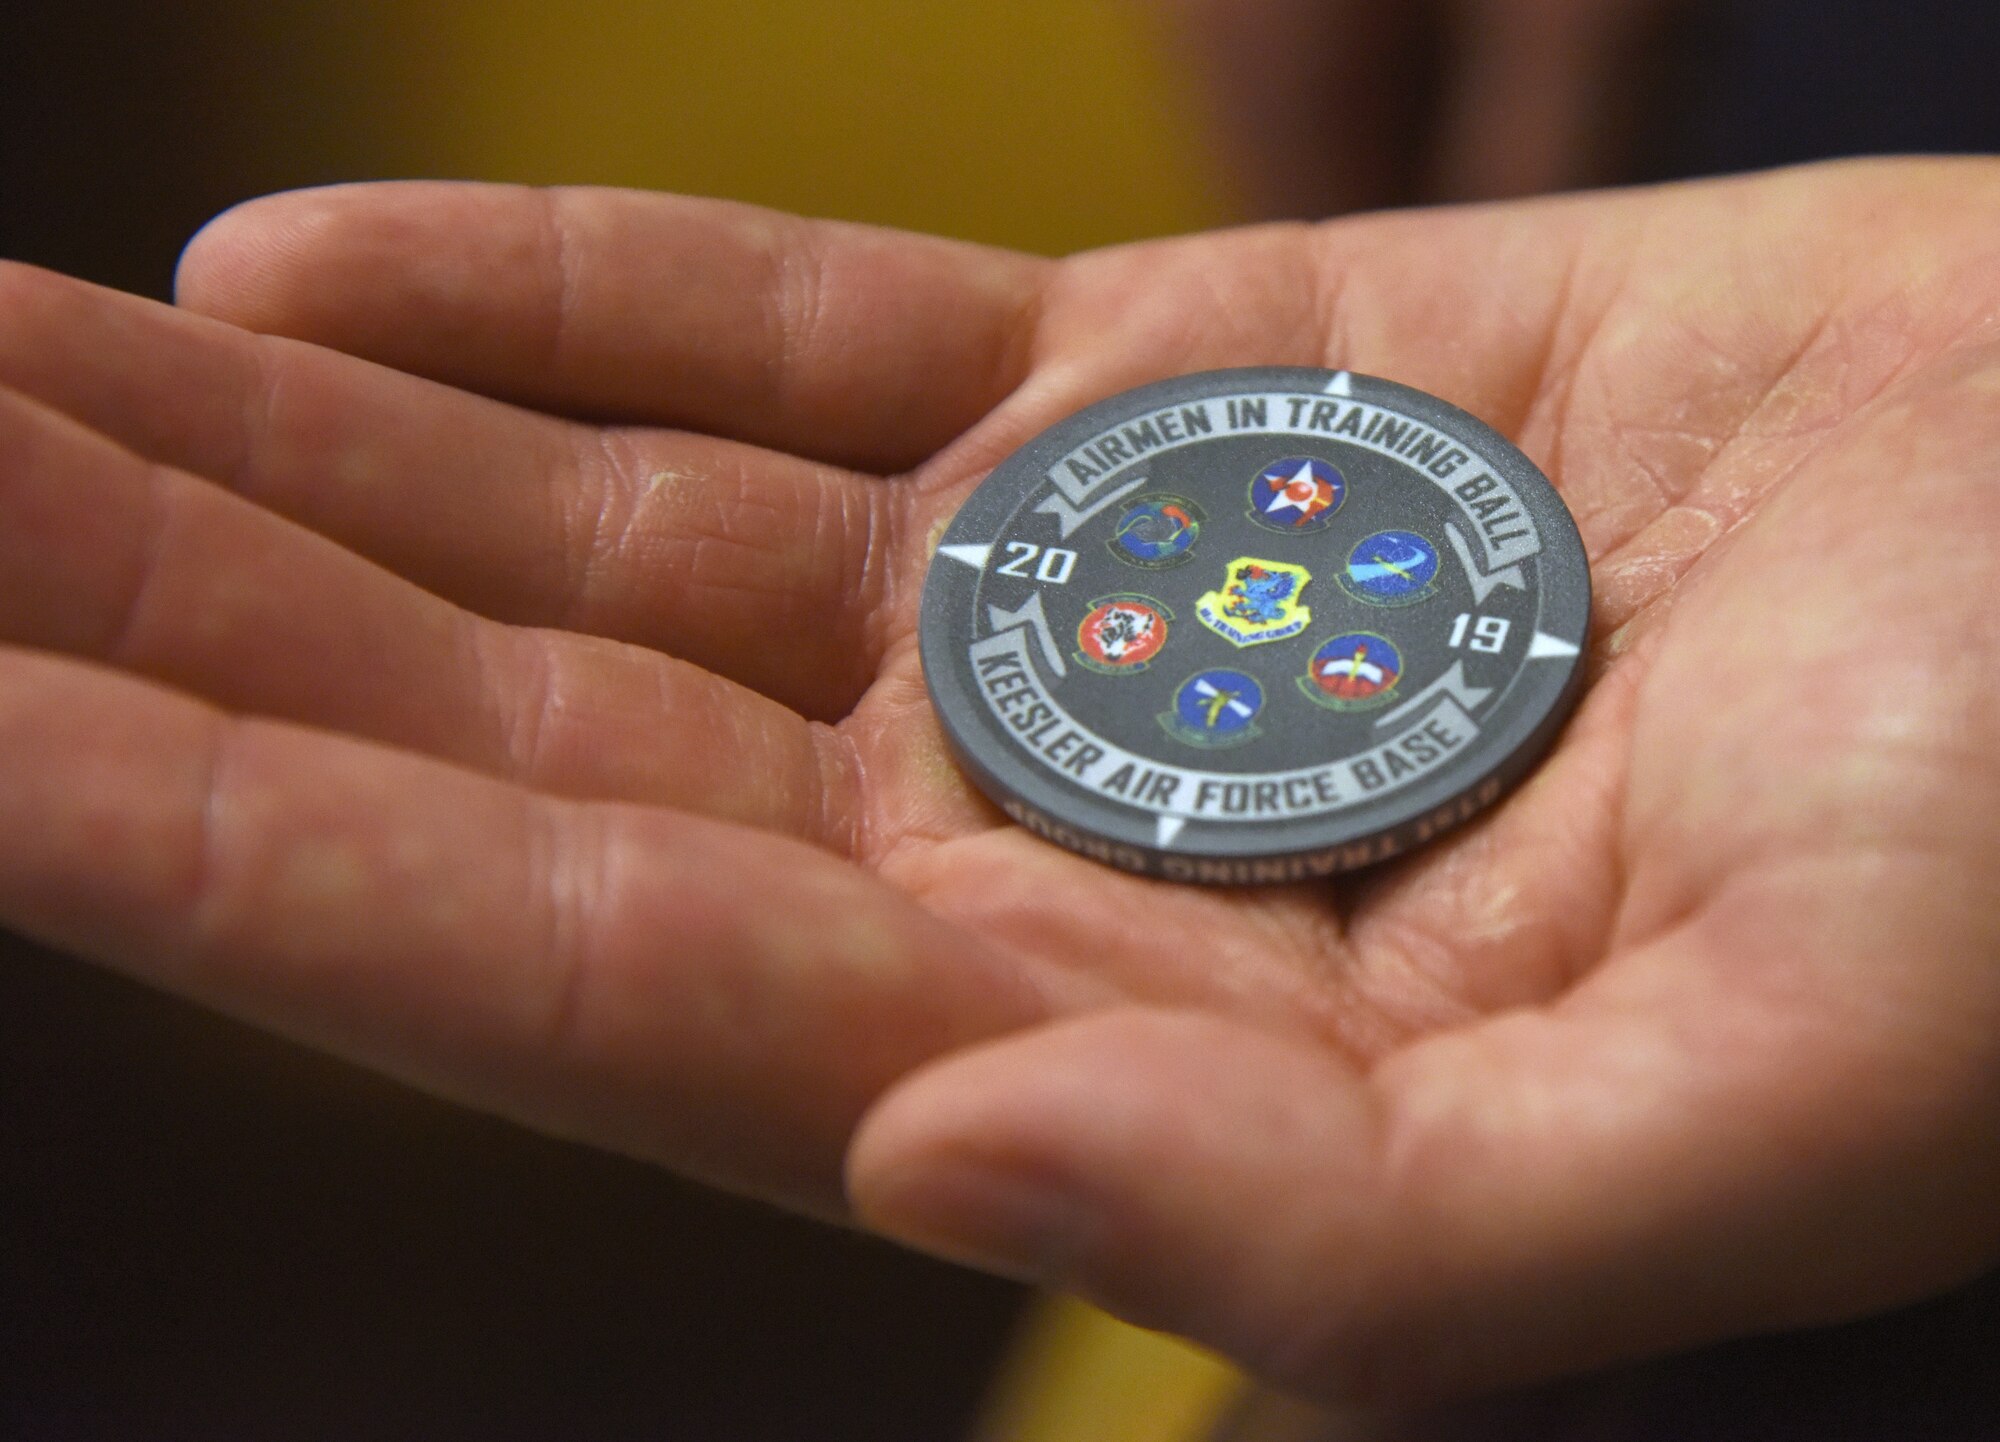 U.S. Air Force Tech. Sgt. Zachary Bartlett, 81st Training Group Airman transition assistance flight flight chief, displays a chip commemorating the Airmen In Training Ball at the Bay Breeze Event Center on Keesler Air Force Base, Mississippi, April 19, 2019. The event, hosted by the 81st TRG, is the first of its kind and was geared toward training Airmen on how to participate and act during a formal military ball so they can feel confident in their abilities when arriving at their follow-on locations. The Airmen served in key positions throughout the ball such as emcees, color guard, POW/MIA table ceremony, national anthem singer and the invocation. (U.S. Air Force photo by Kemberly Groue)